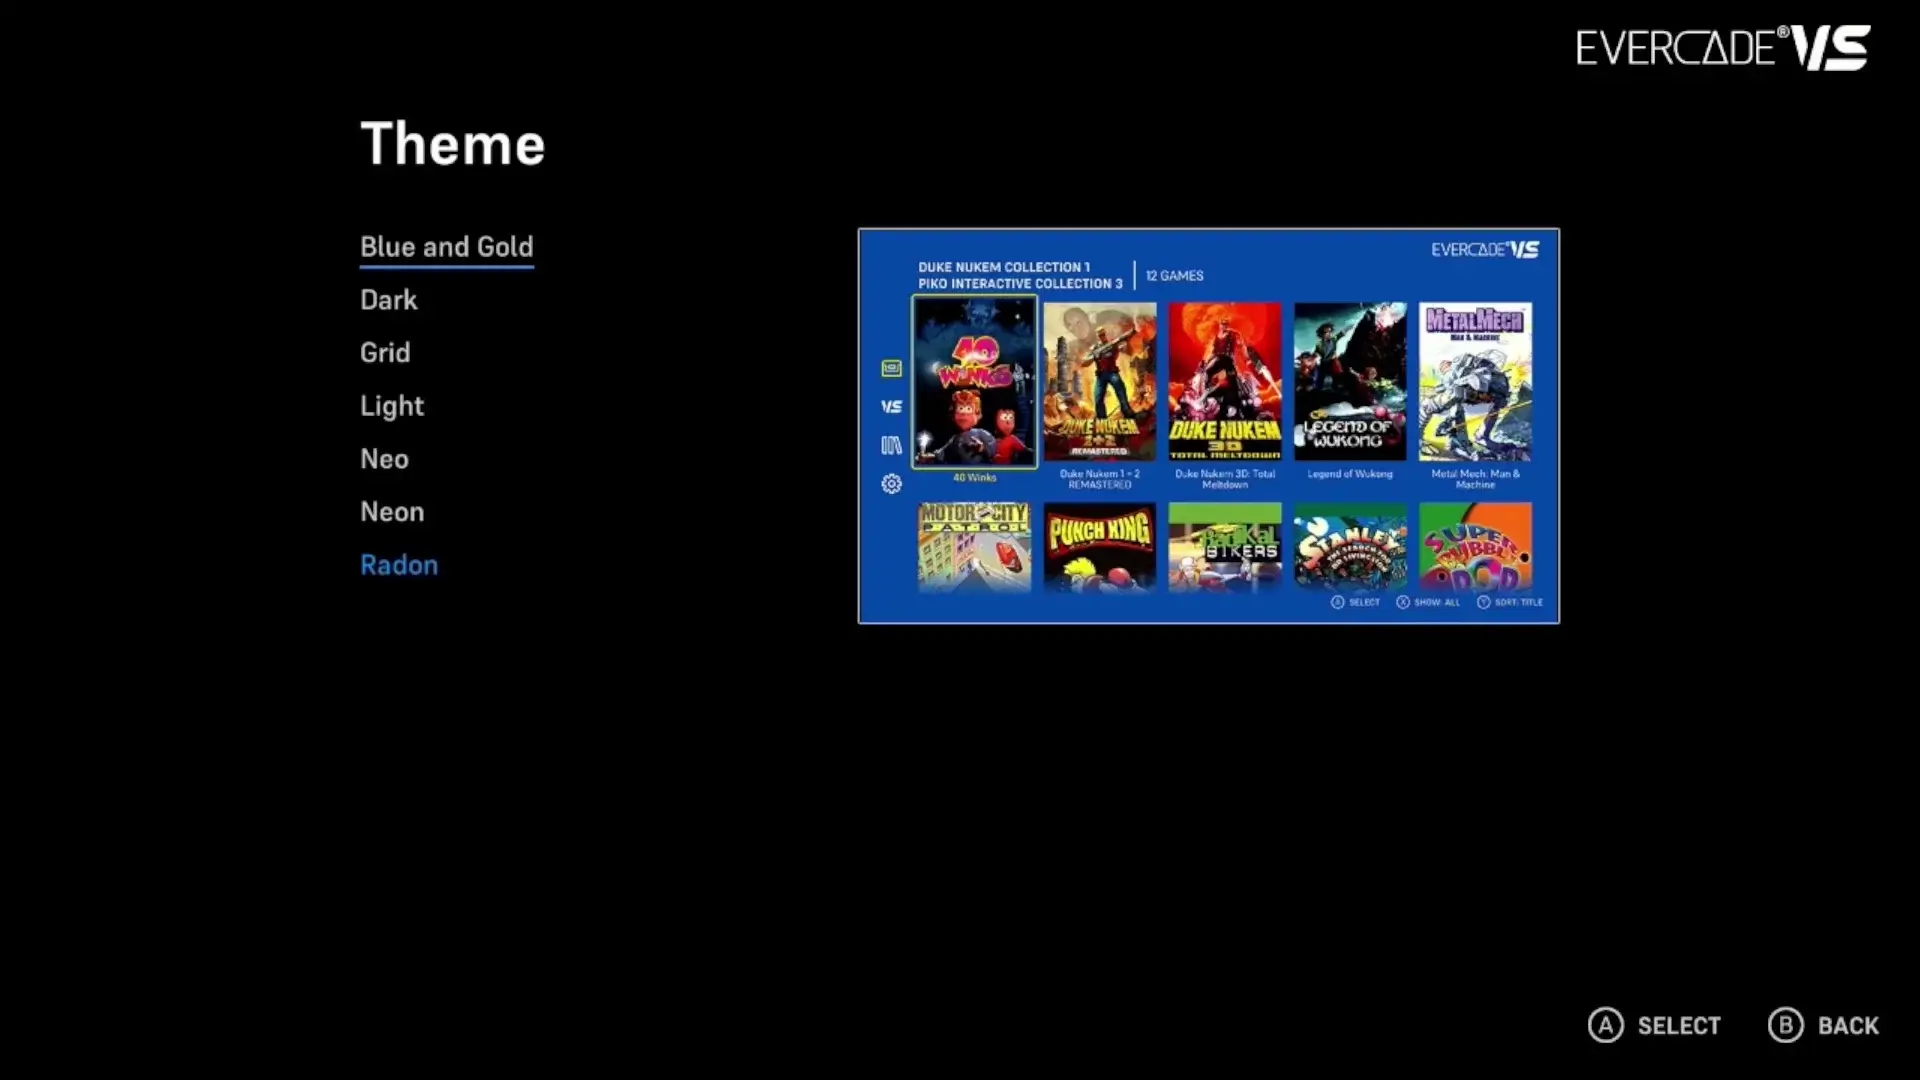 Theme selection menu for the Evercade VS showing available themes to customise the retro console